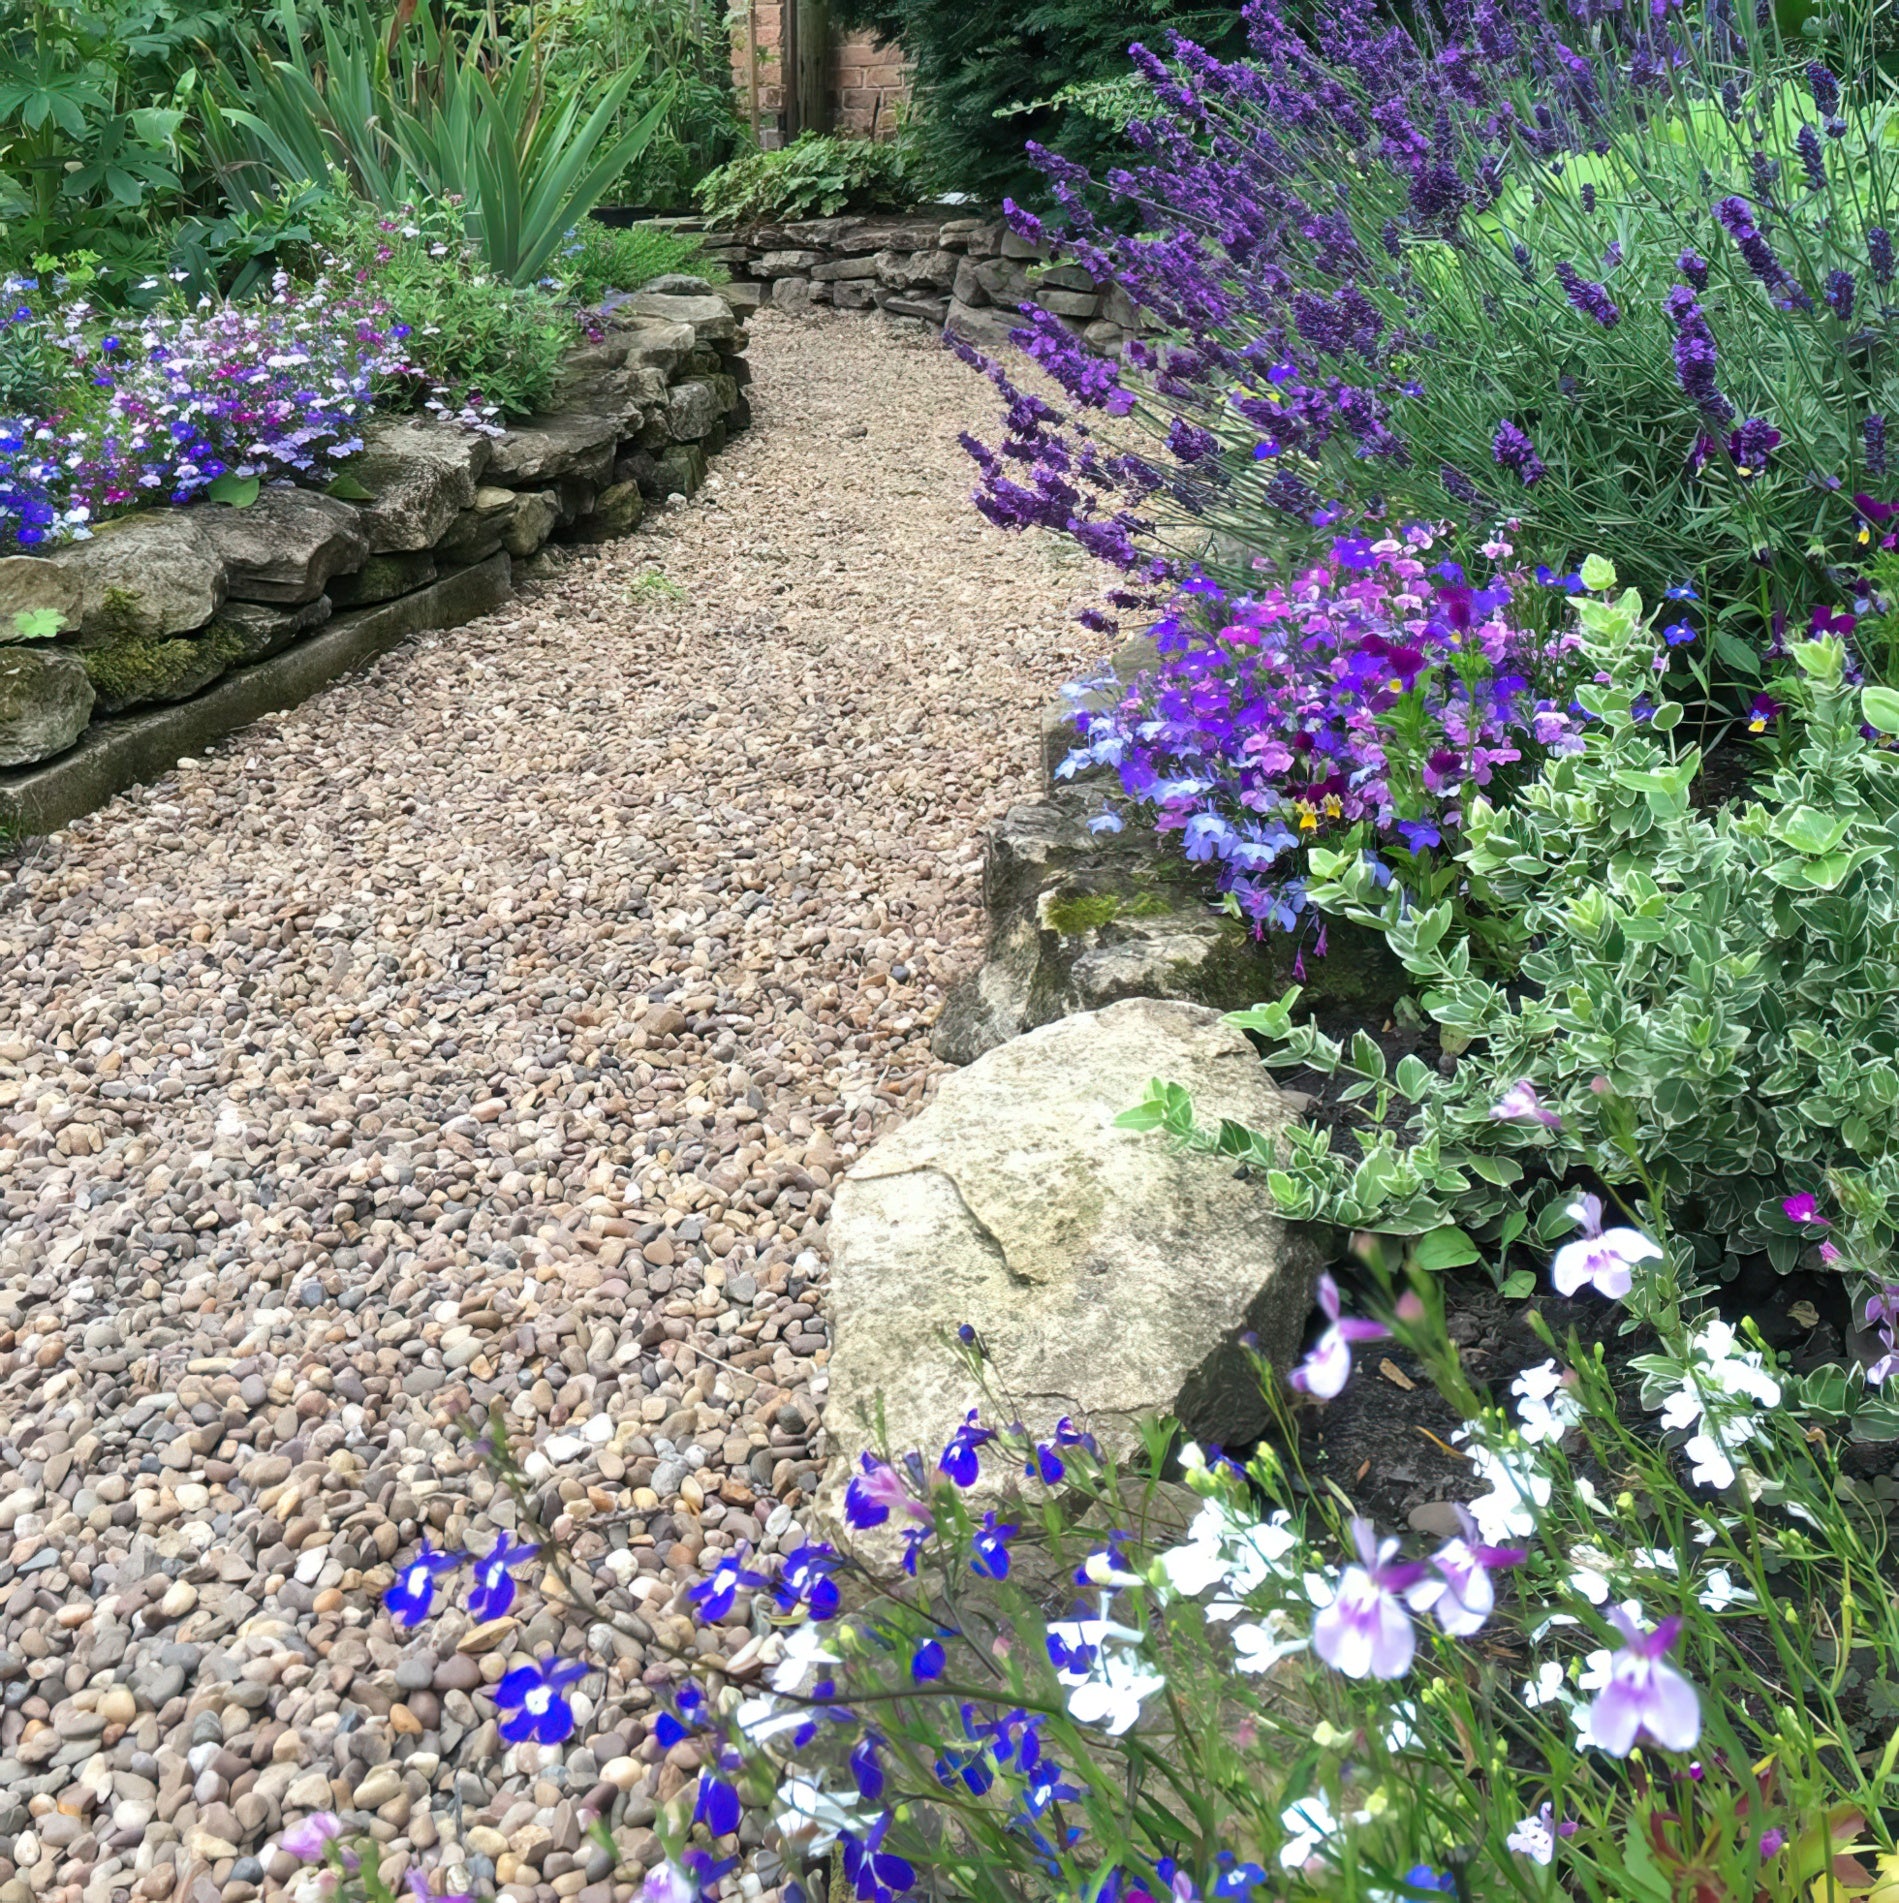 A 20mm Trent Valley Gravel path from Brisks leads through a garden bordered by lush greenery and vibrant flowers in purple, white, and blue. Decorative gravels edge the path, with a large rock prominently placed in the foreground. The backdrop includes dense foliage.